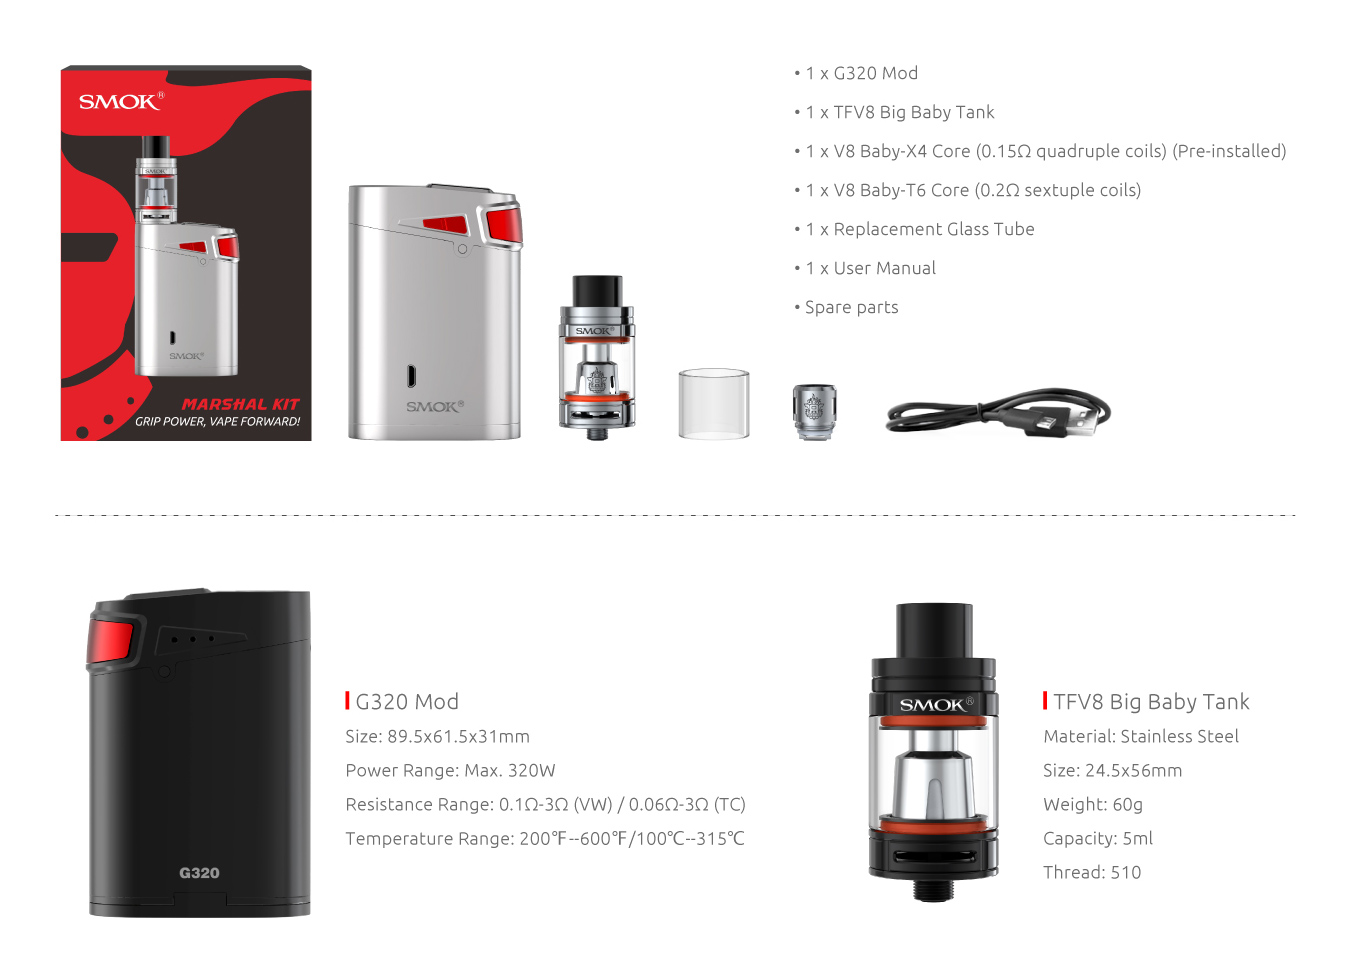 The Includes of SMOK G320 Mod 